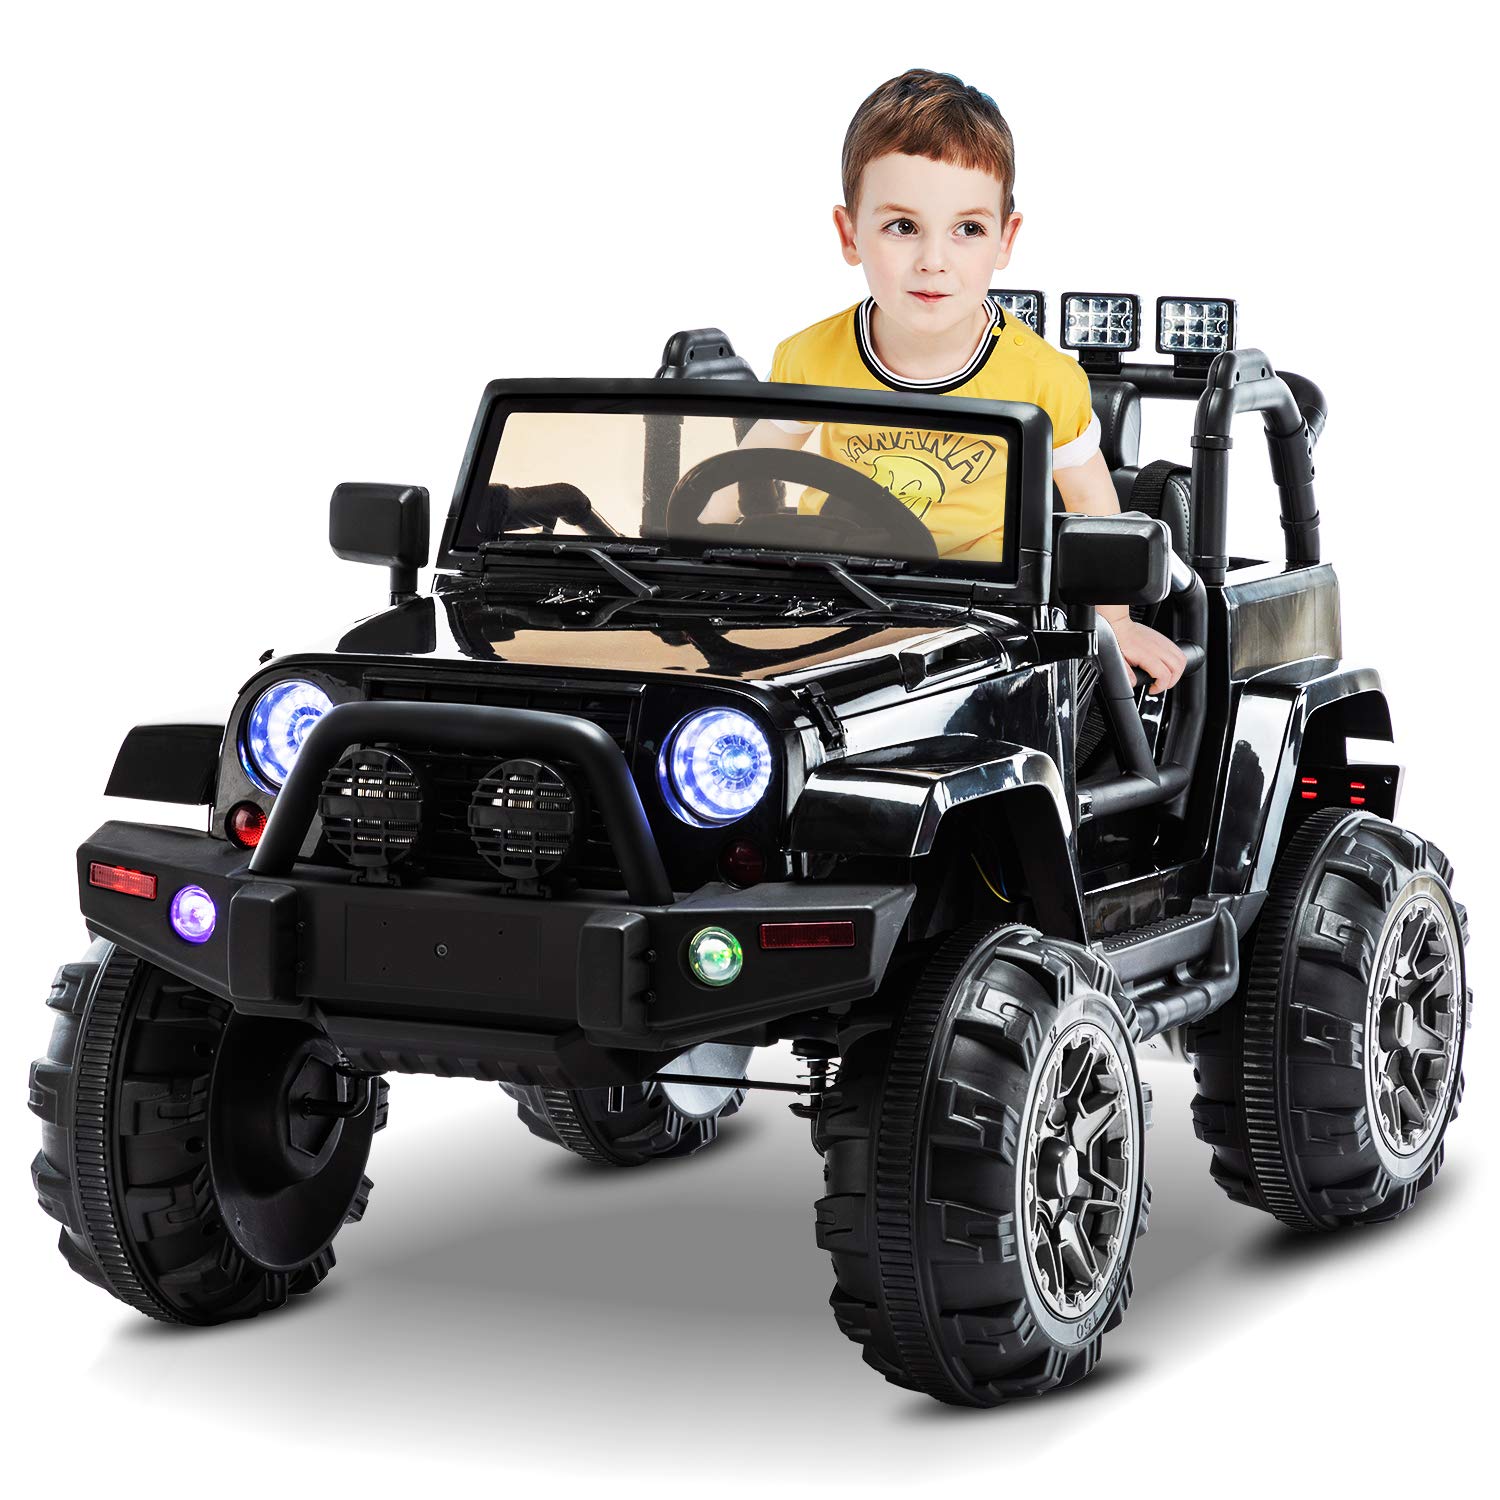 AuAg Electric Ride On Car/Truck Ride on Toys with Parental Remote Control 12V Two Speeds LED Lights MP3 Player Prerecorded Kid Song Easy to Assemble Indoor and Outdoor Gift for Kids